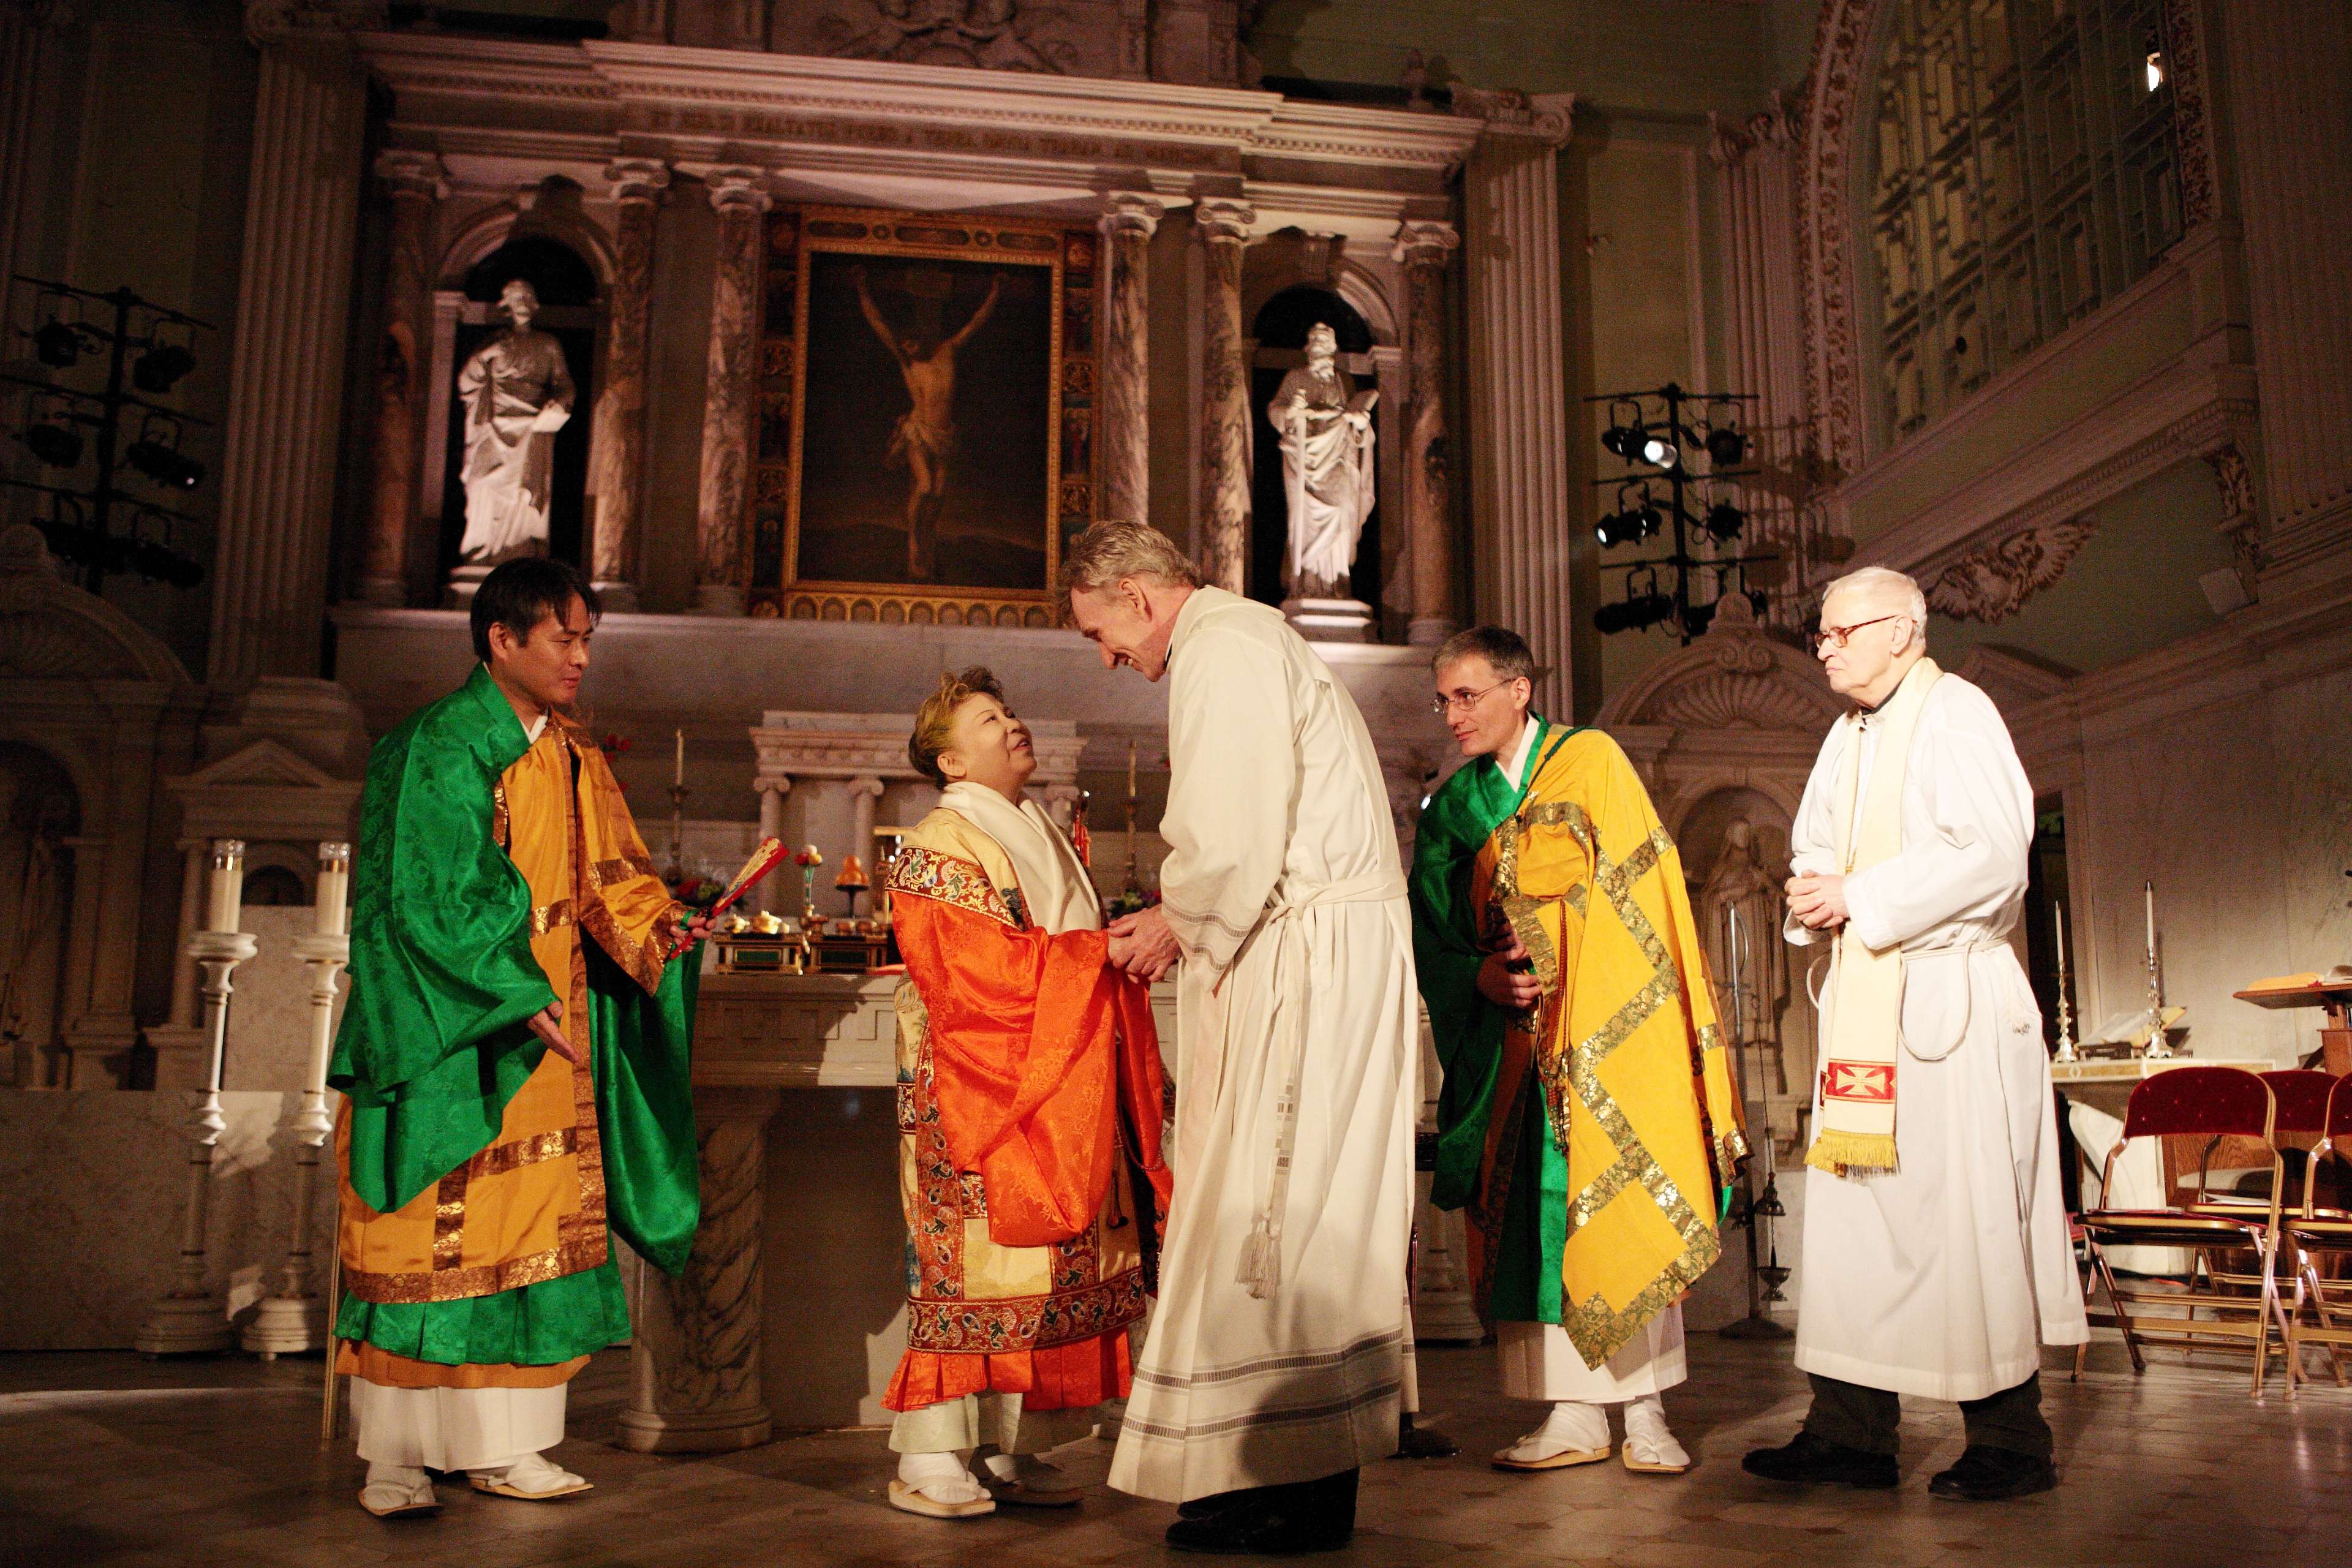 In a large cloister with Catholic statues, Her Holiness, in orange robe, embraces the hands of a tall Catholic priest as they both look smilingly at each other; three other priests stand watching.